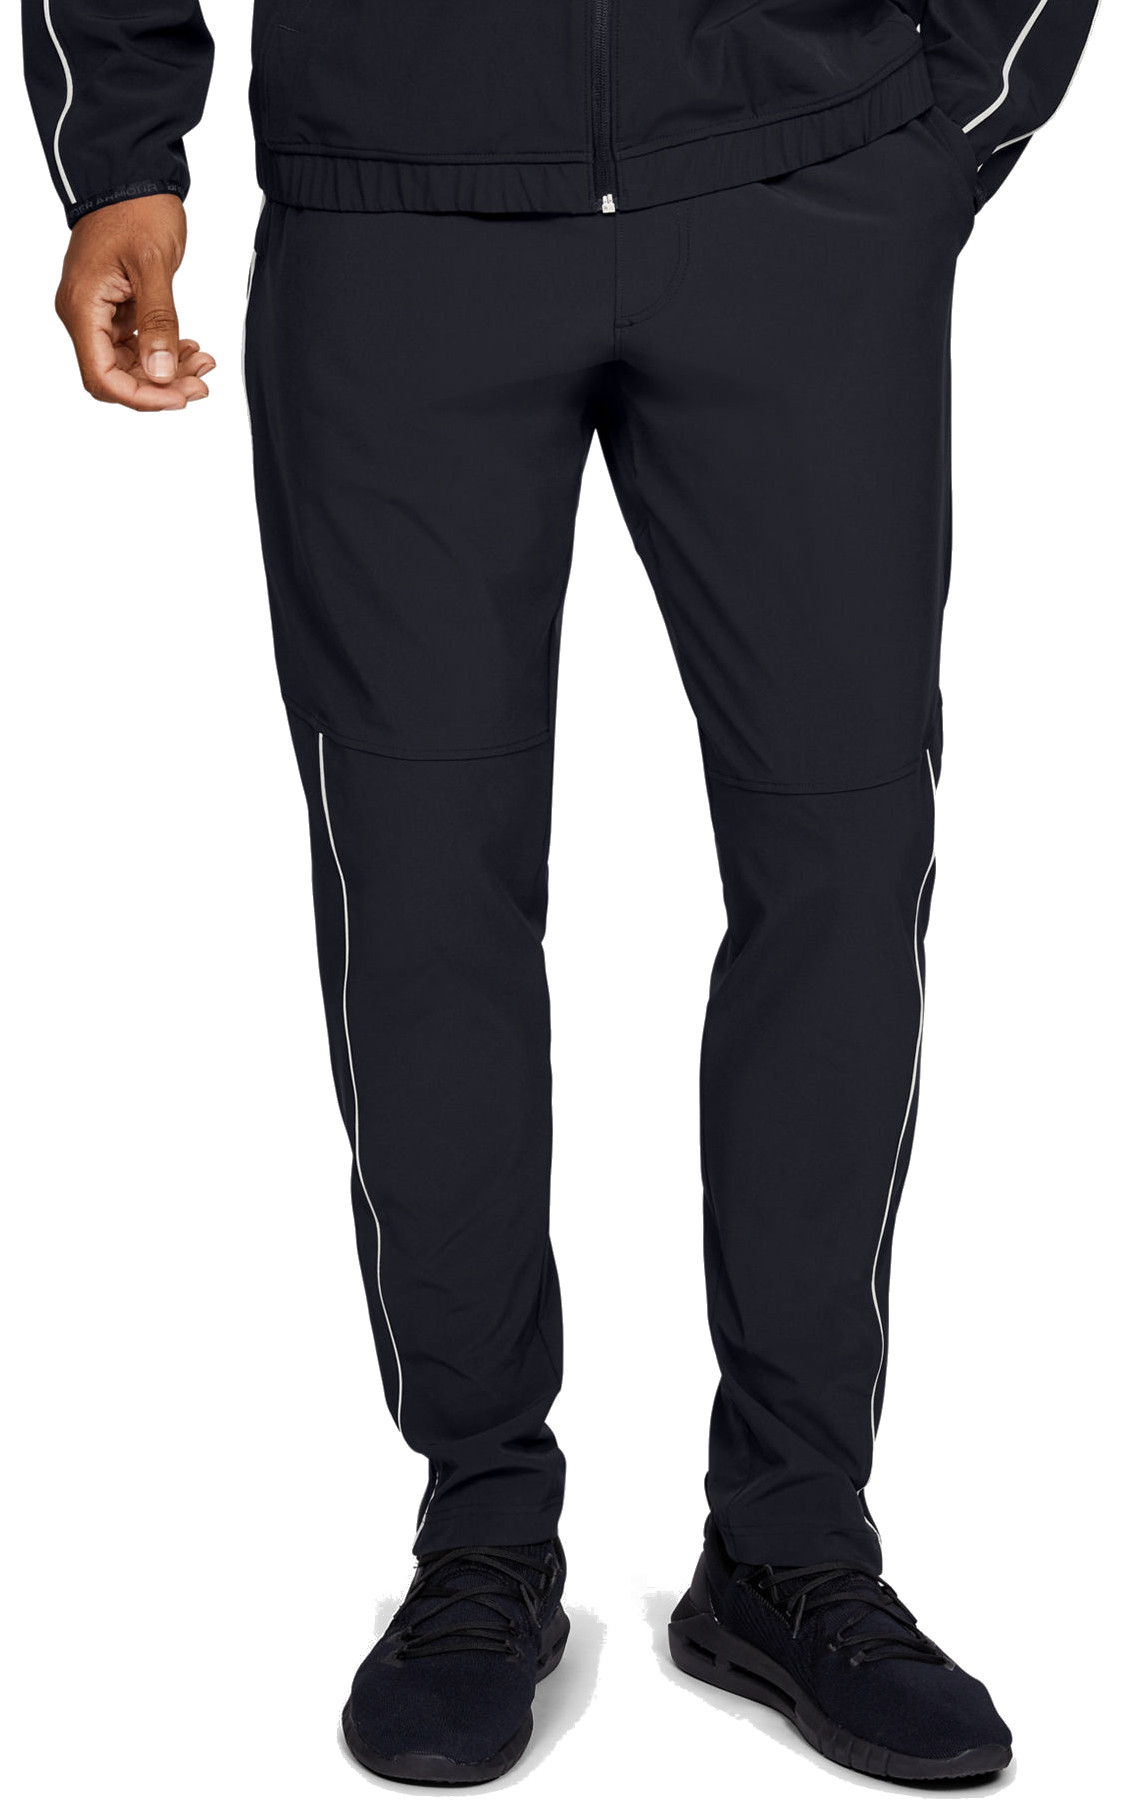  Under Armour Athlete Recovery Woven Warm Up Bottom